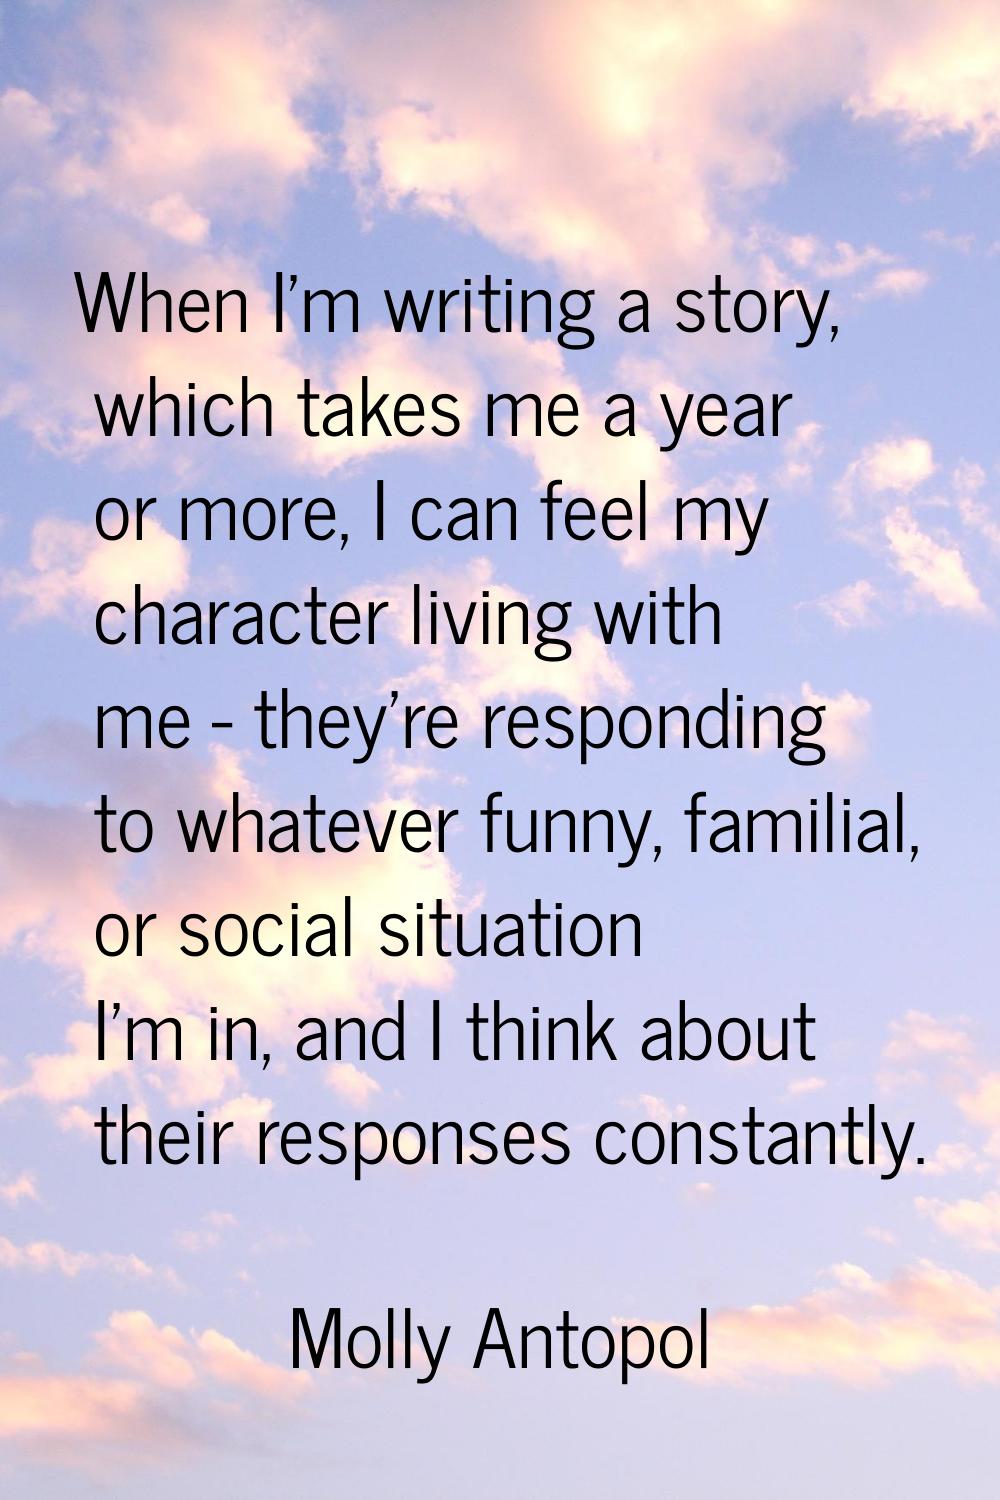 When I'm writing a story, which takes me a year or more, I can feel my character living with me - t